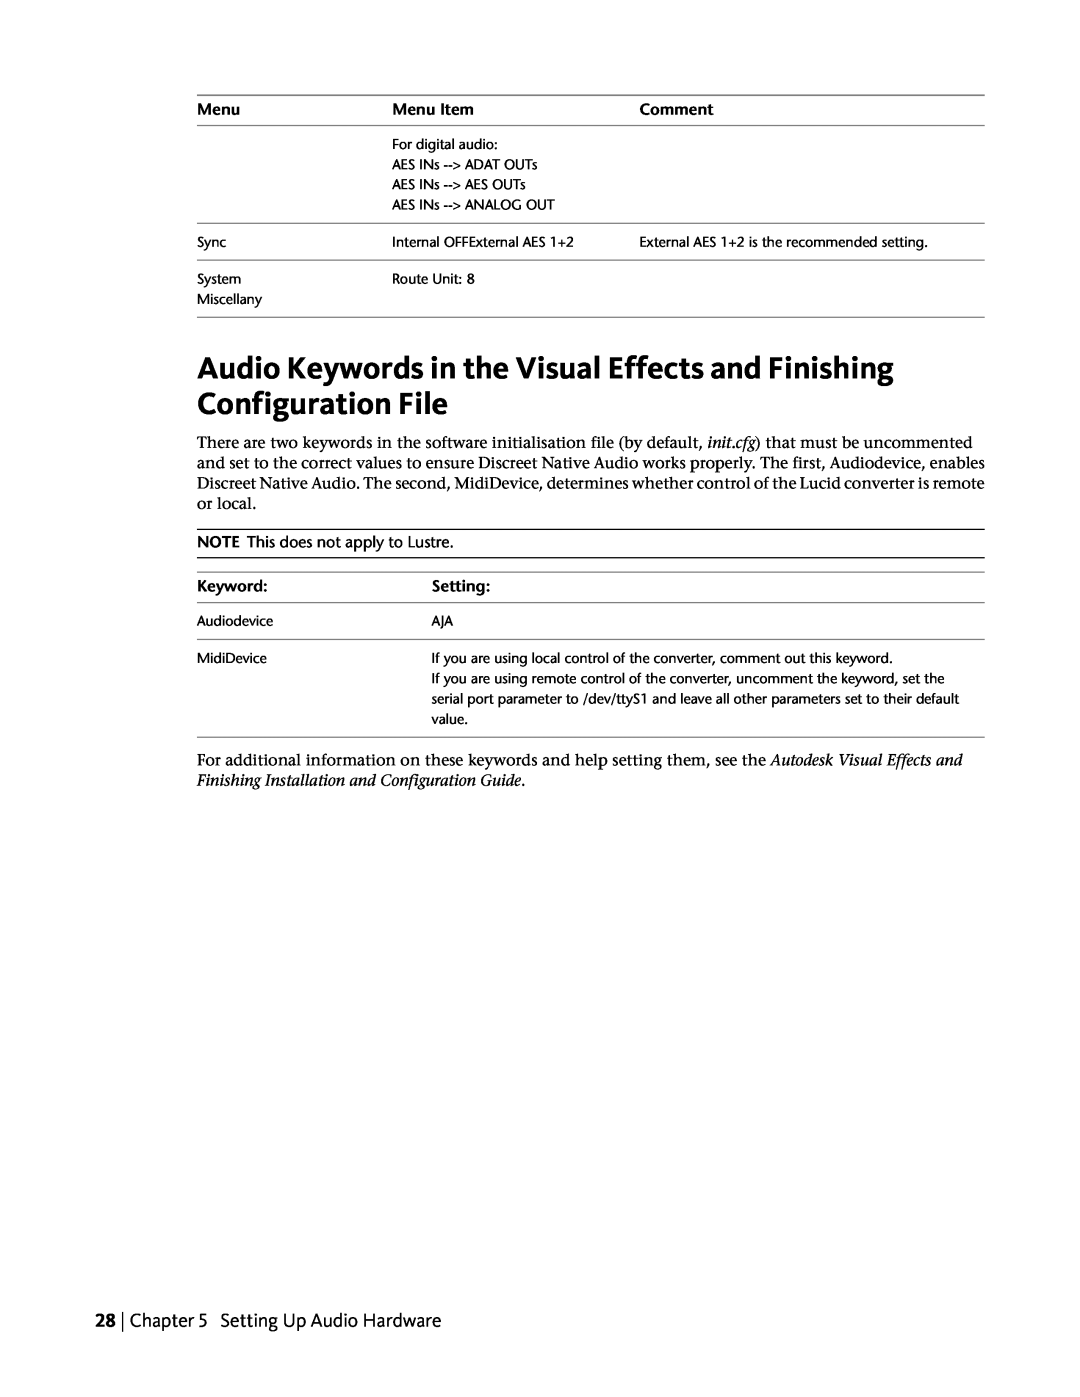 HP Z800 manual Audio Keywords in the Visual Effects and Finishing Configuration File, Setting Up Audio Hardware 